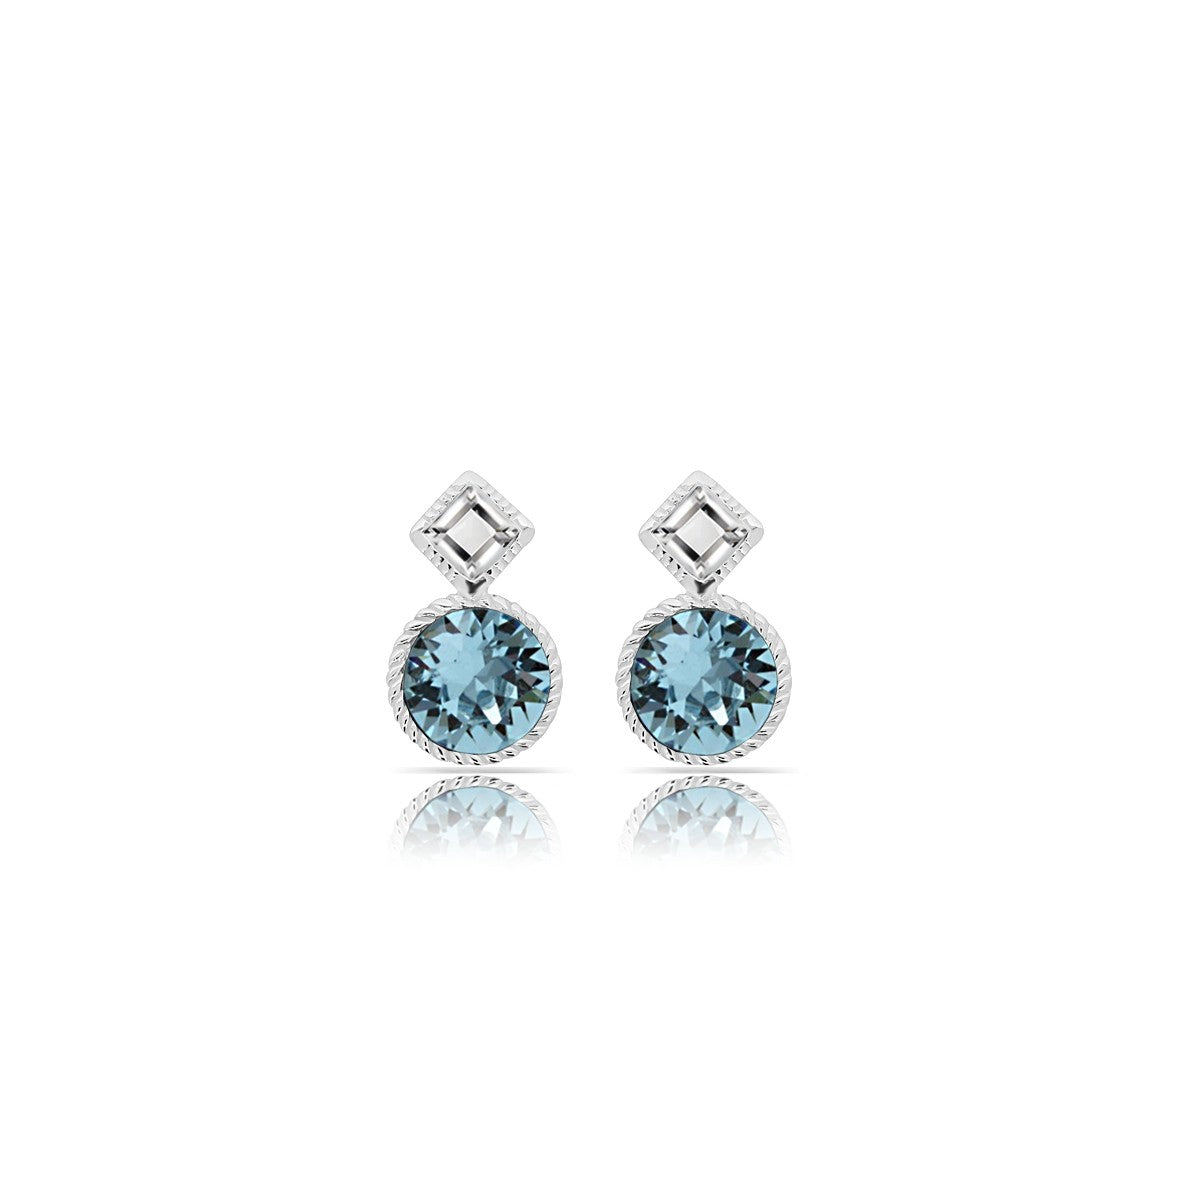 Sterling Silver Earrings with crystals from Swarovski® Aqua/White